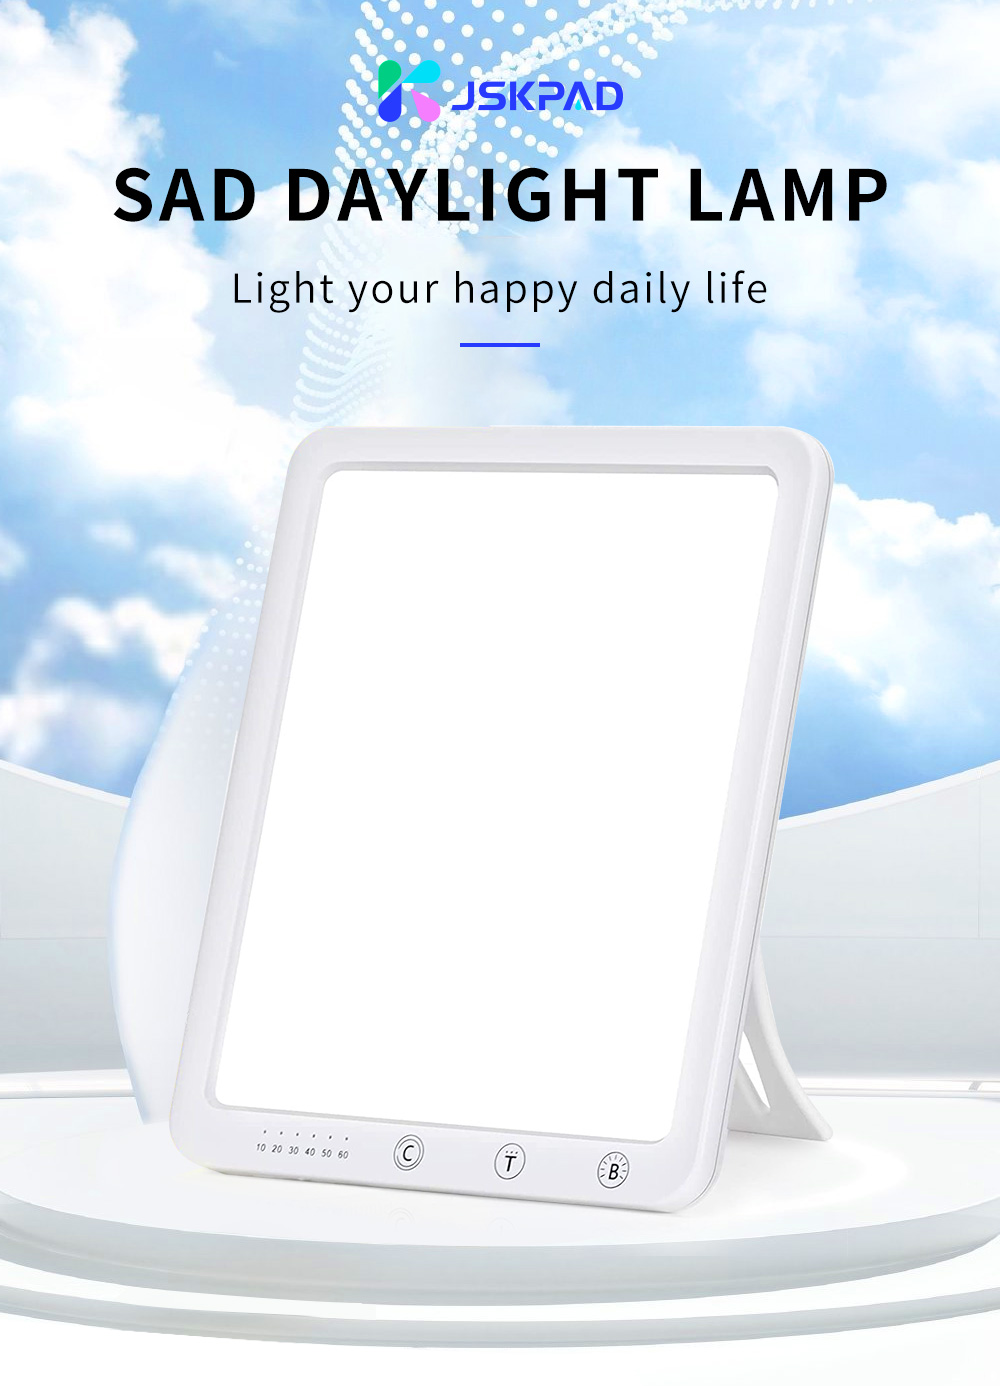 light therapy lamp instructions